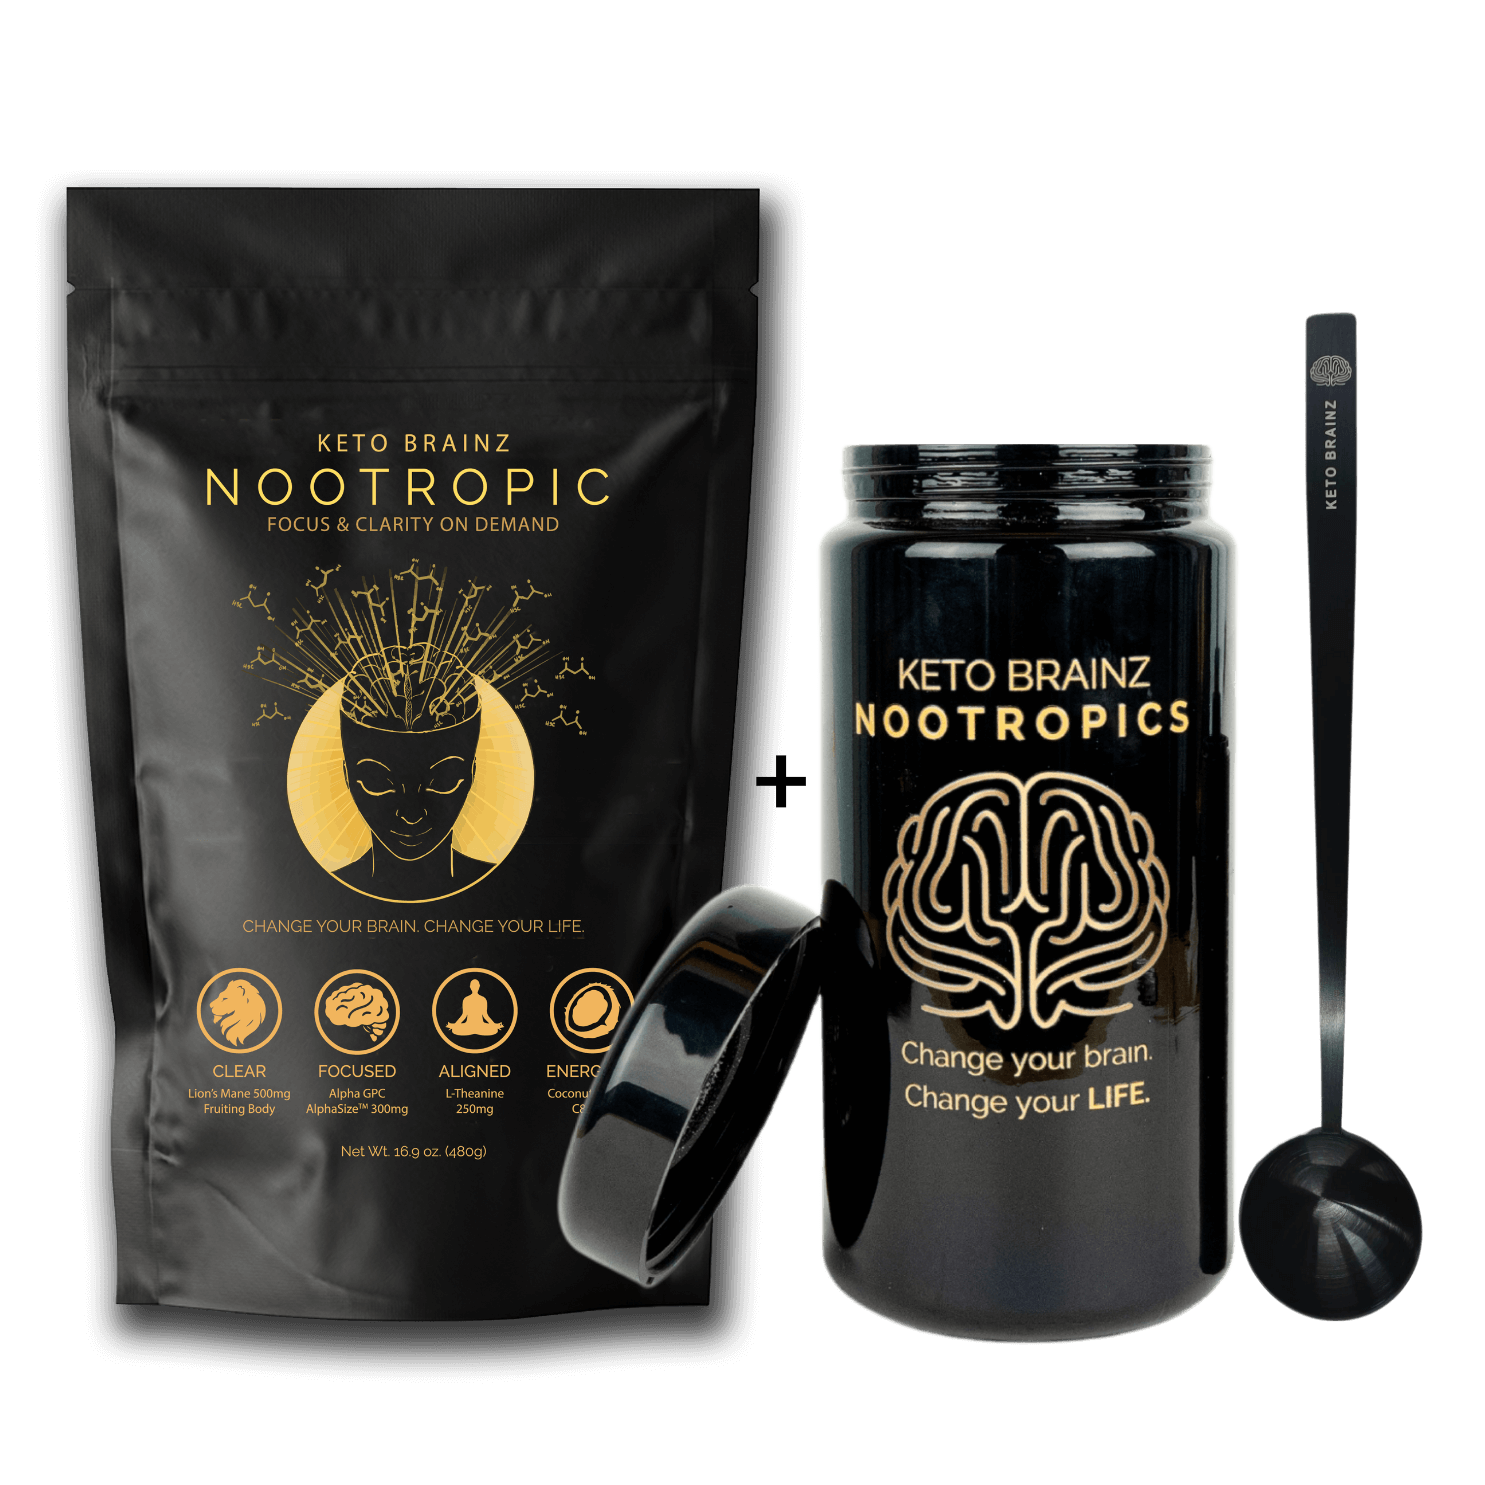 product image of Keto Brainz Nootropic creamer, miron glass counter top jar and long handled spoon combo